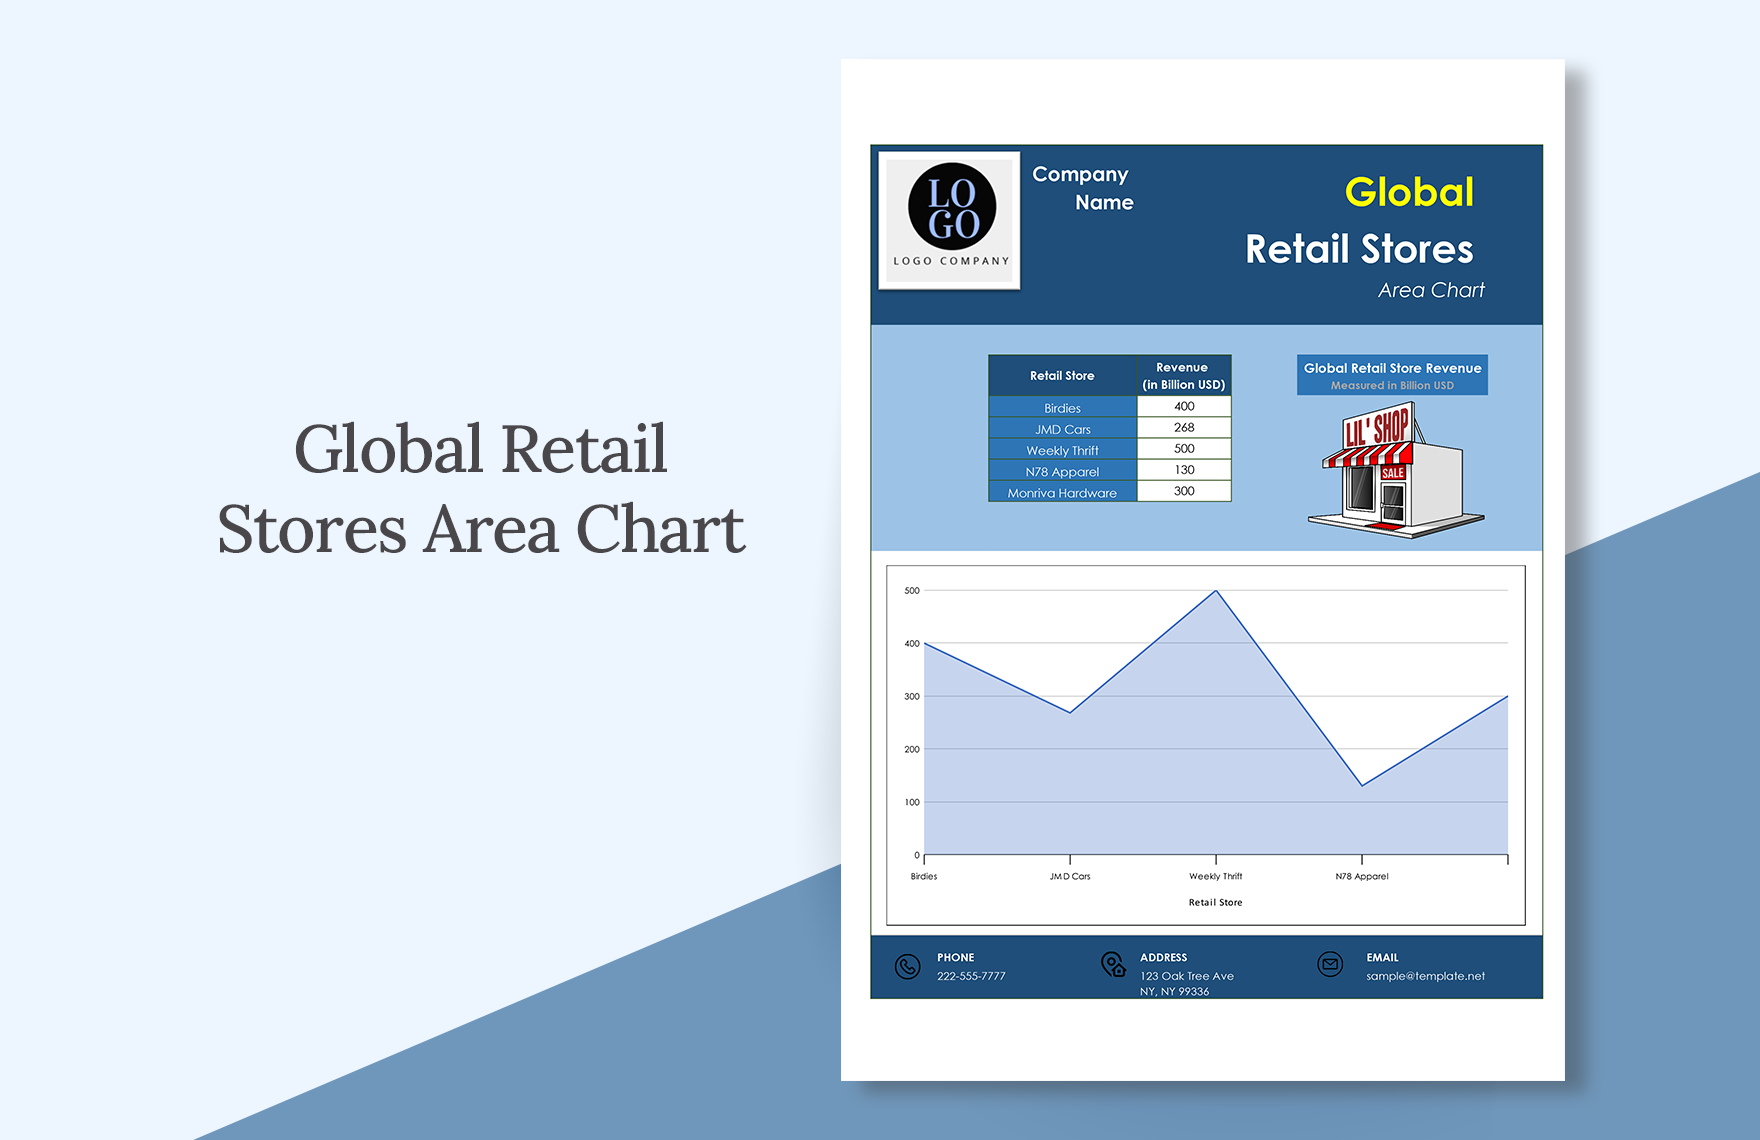 Global Retail Stores Area Chart